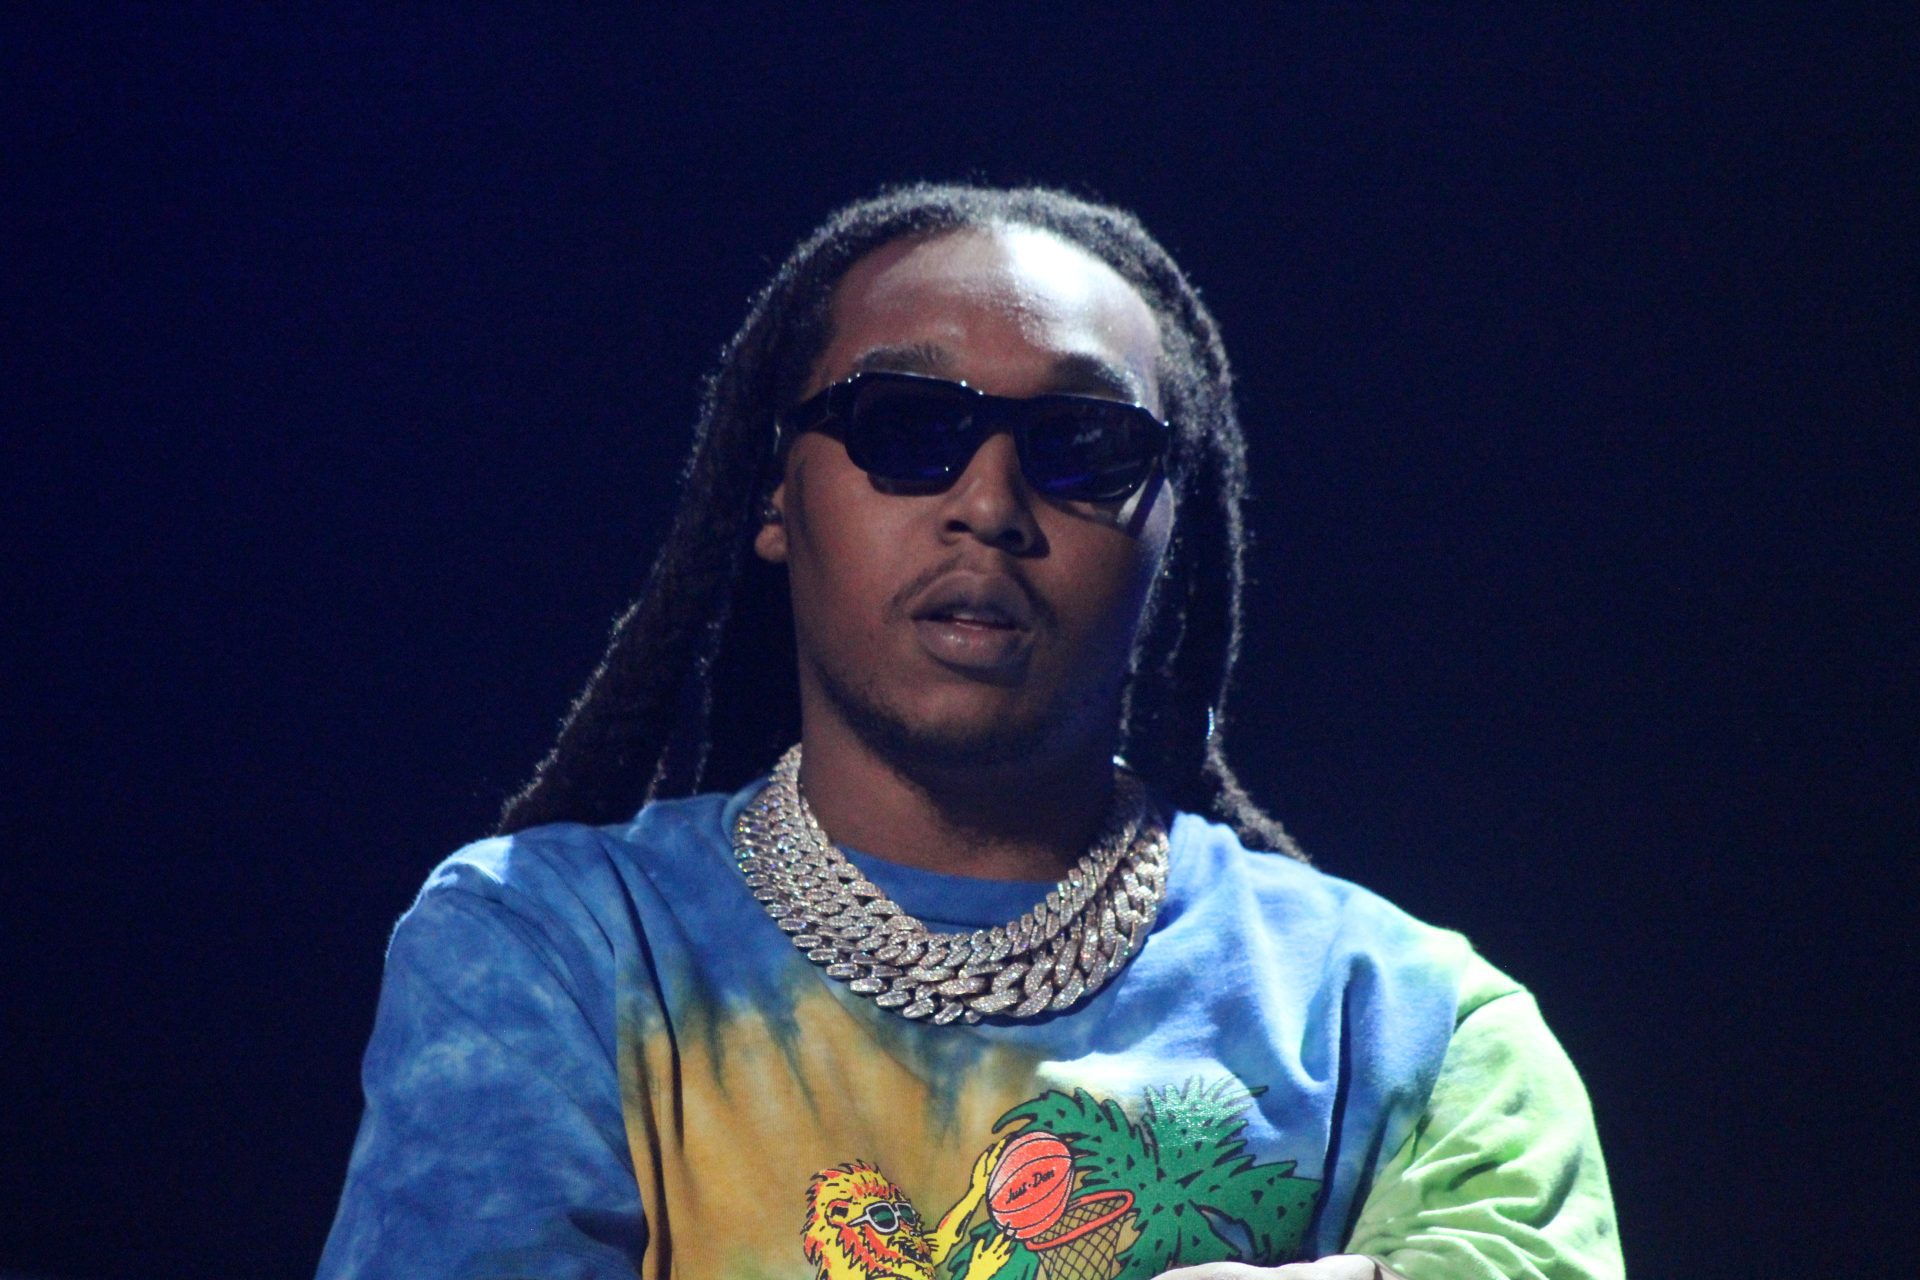 Takeoff's mother is taking action against bowling alley where he was killed